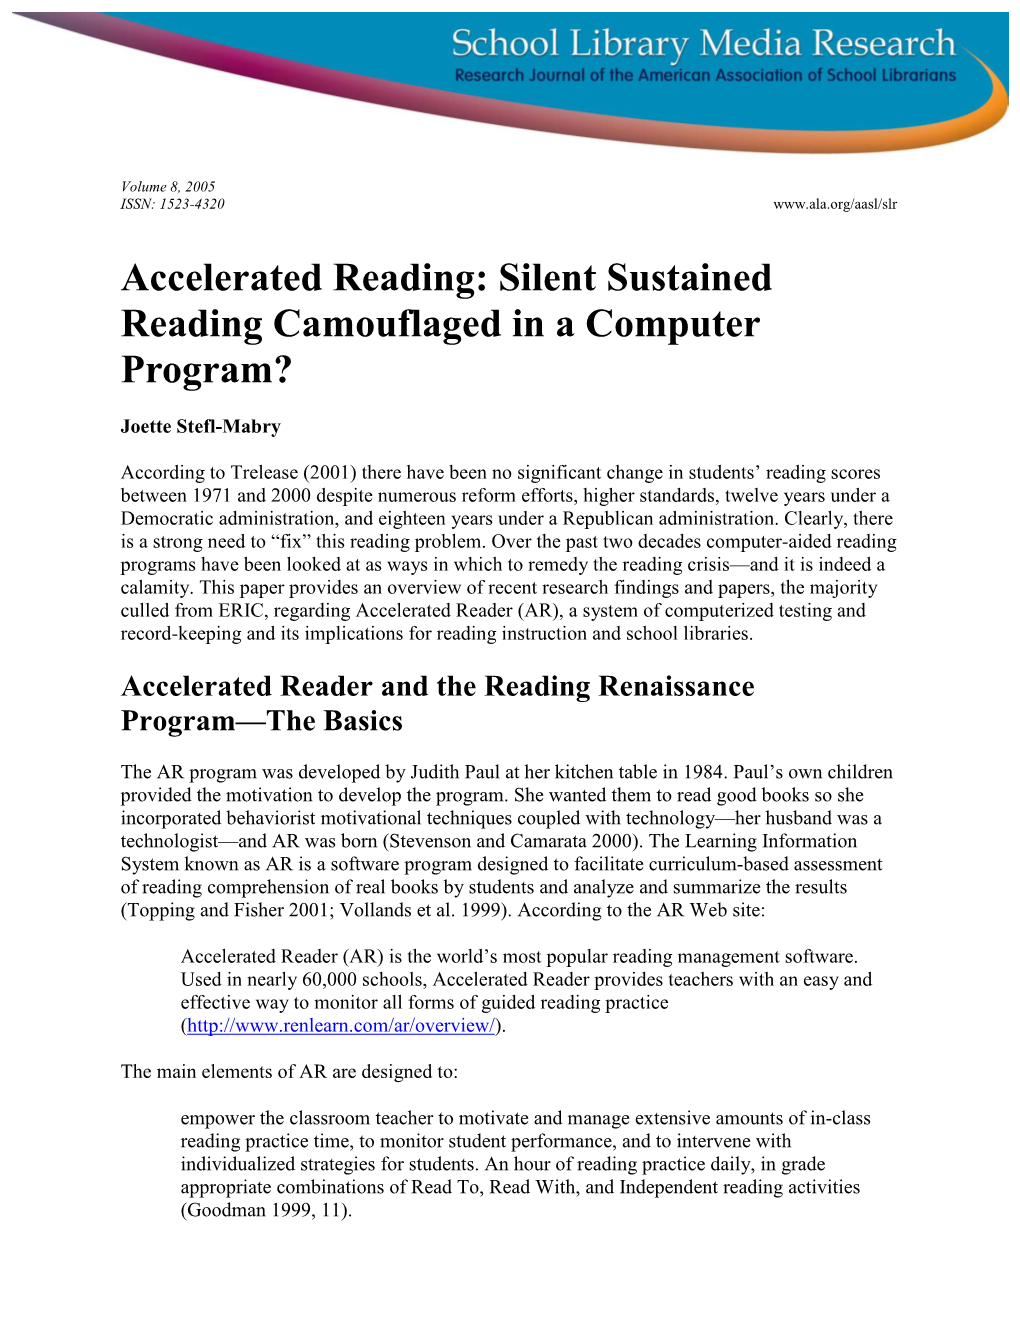 Accelerated Reading: Silent Sustained Reading Camouflaged in a Computer Program?